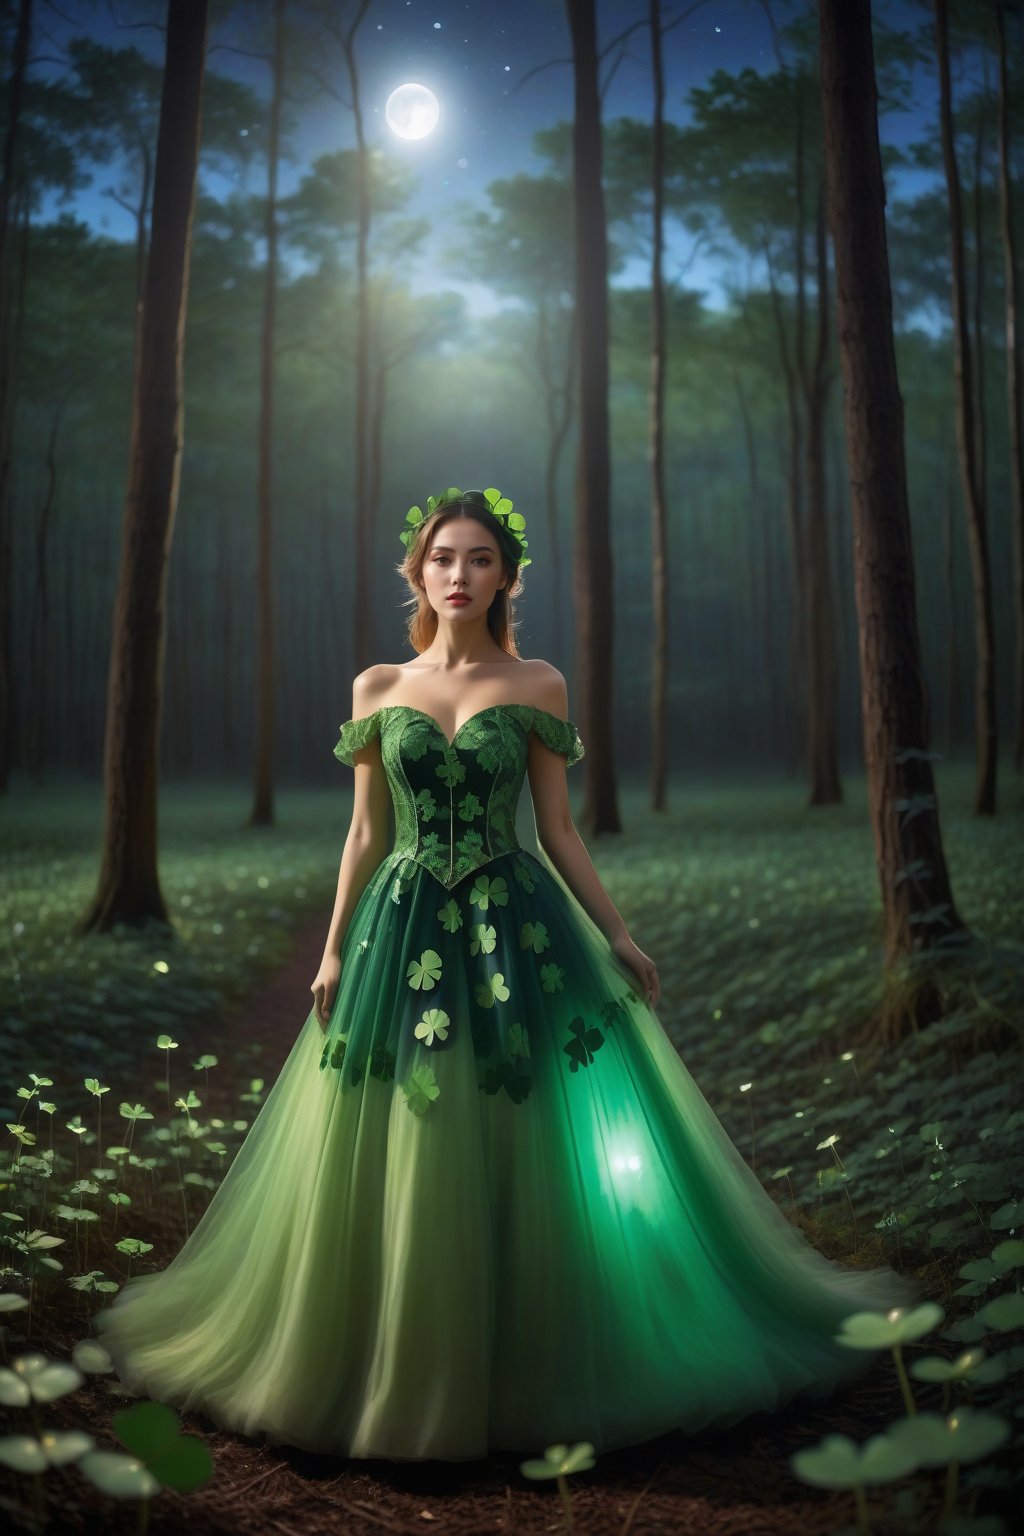 A beautiful girl wearing a four-leaf clover dress, standing in a beautiful forest, with the bright moonlight shining on the earth under the night sky, Magic Forest,